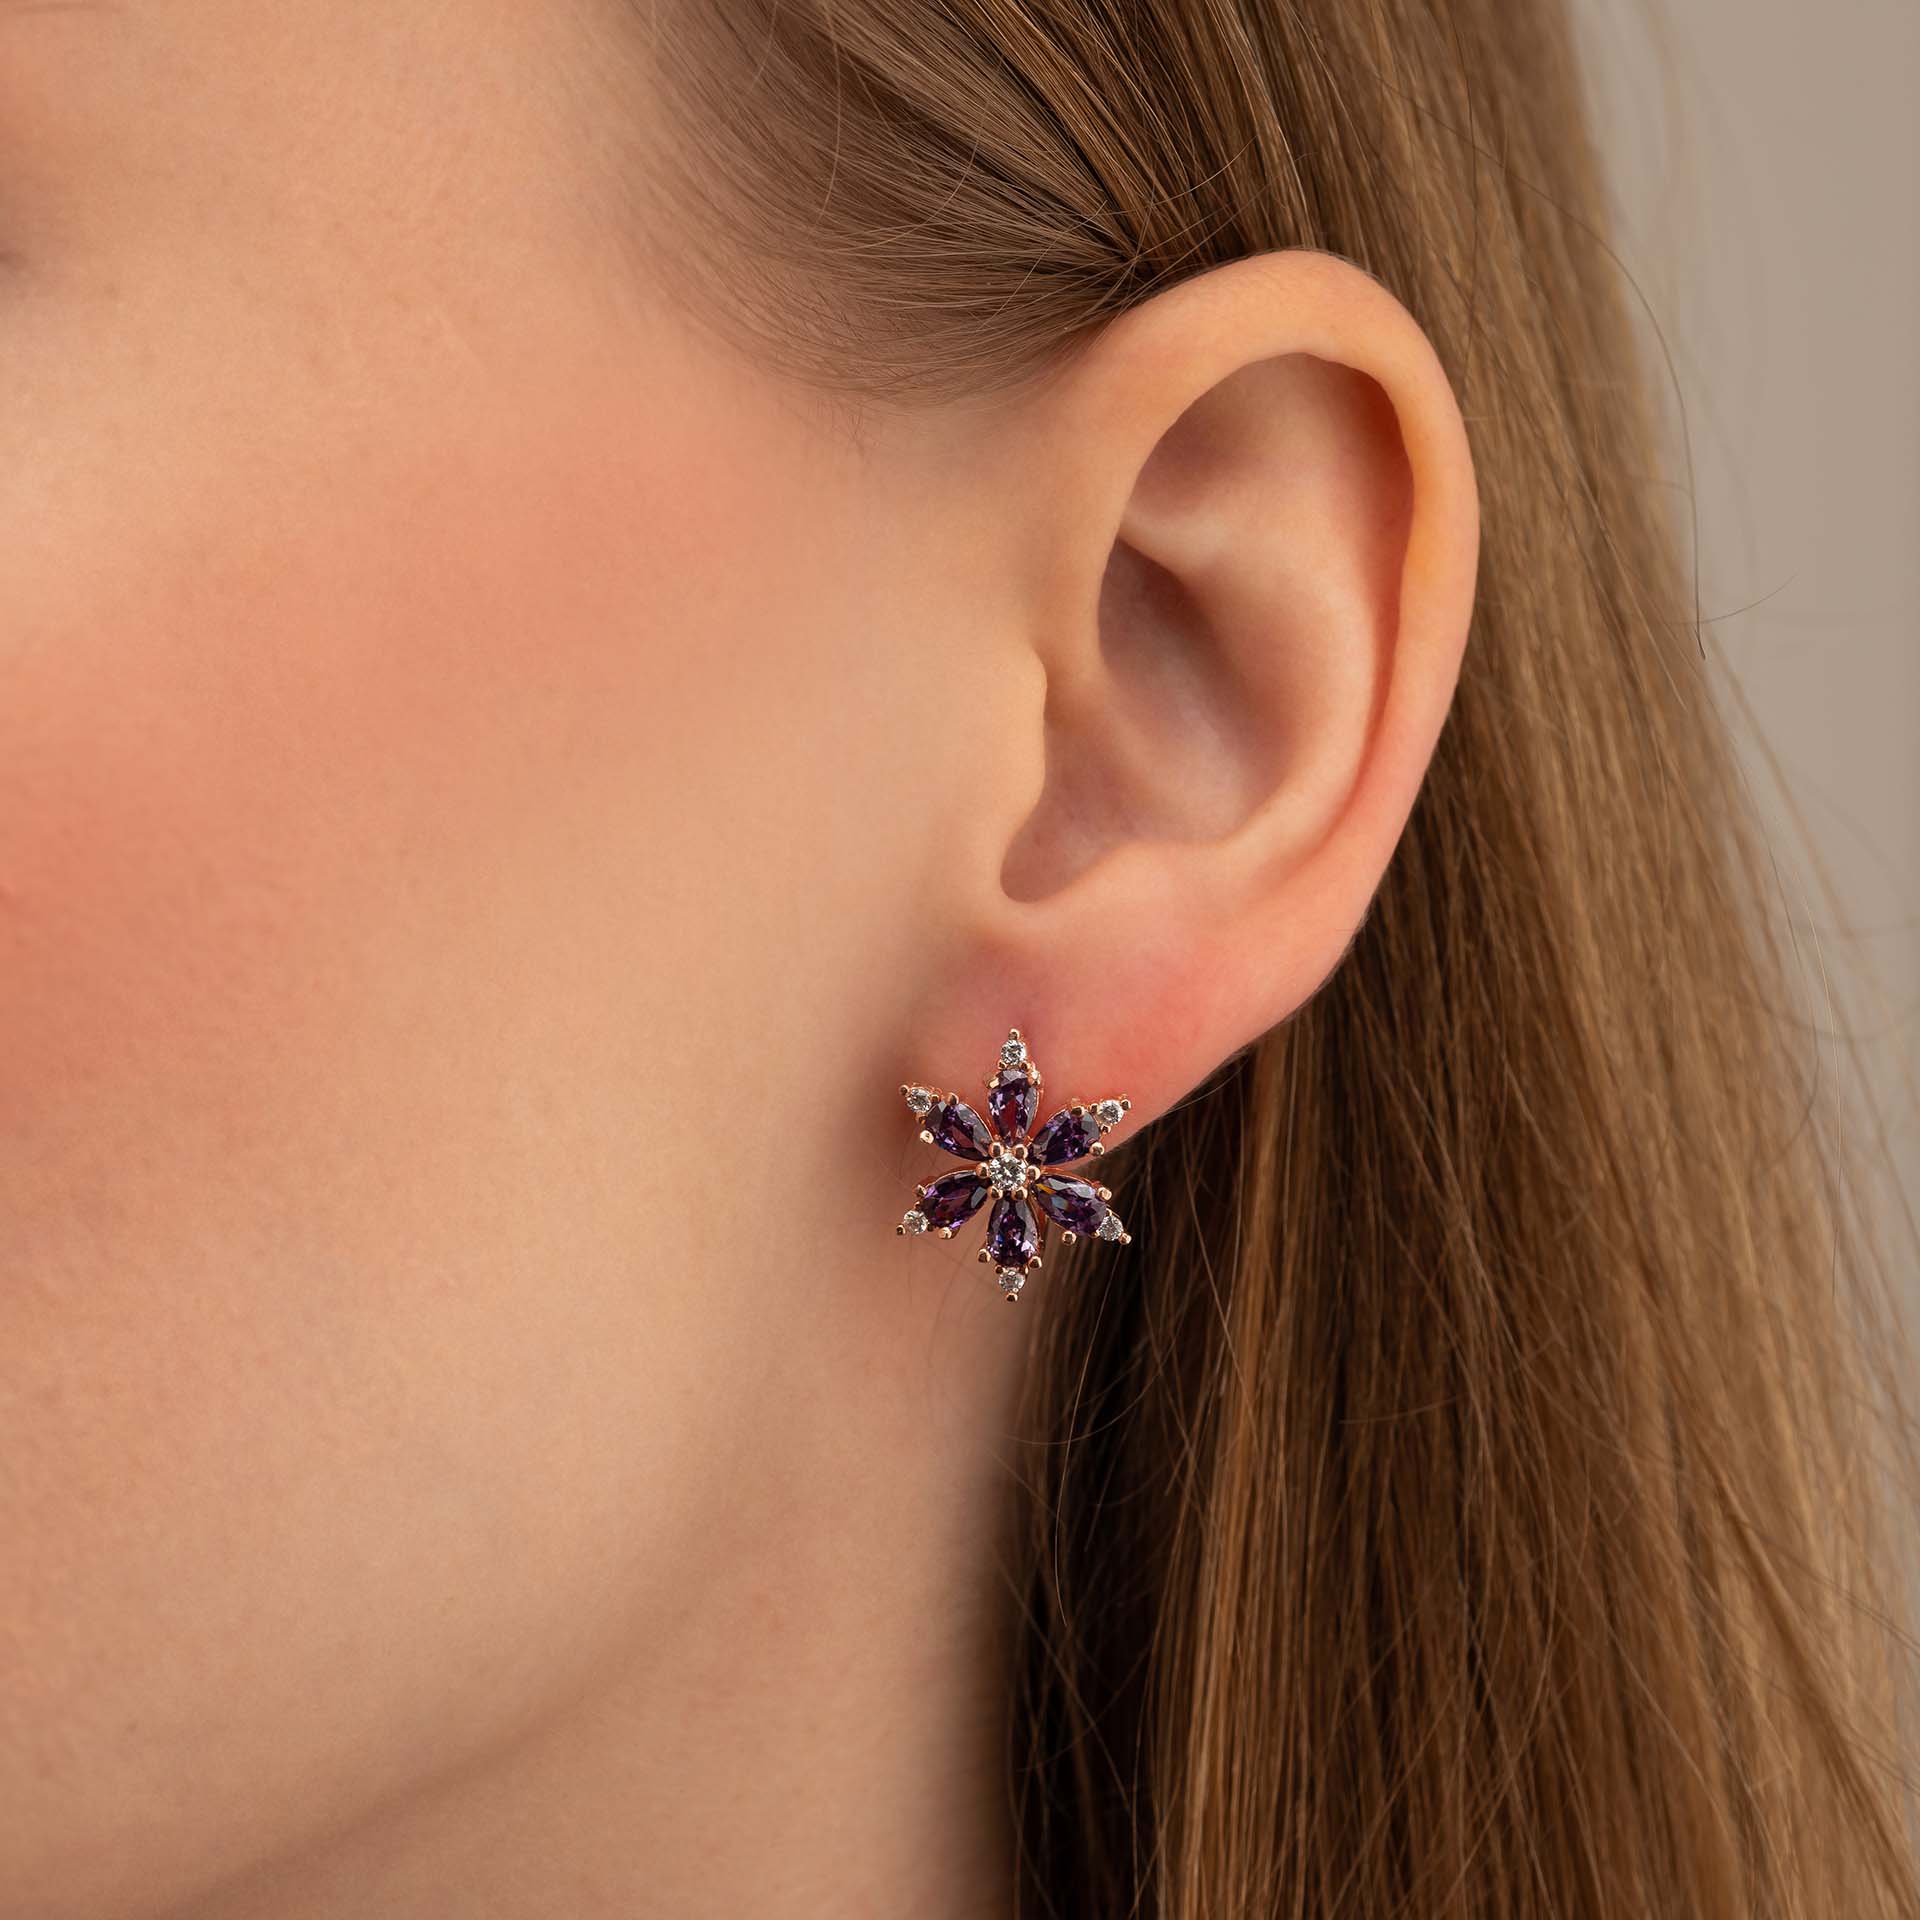 Aster Flower Silver Earrings with Amethyst Stone - Thumbnail